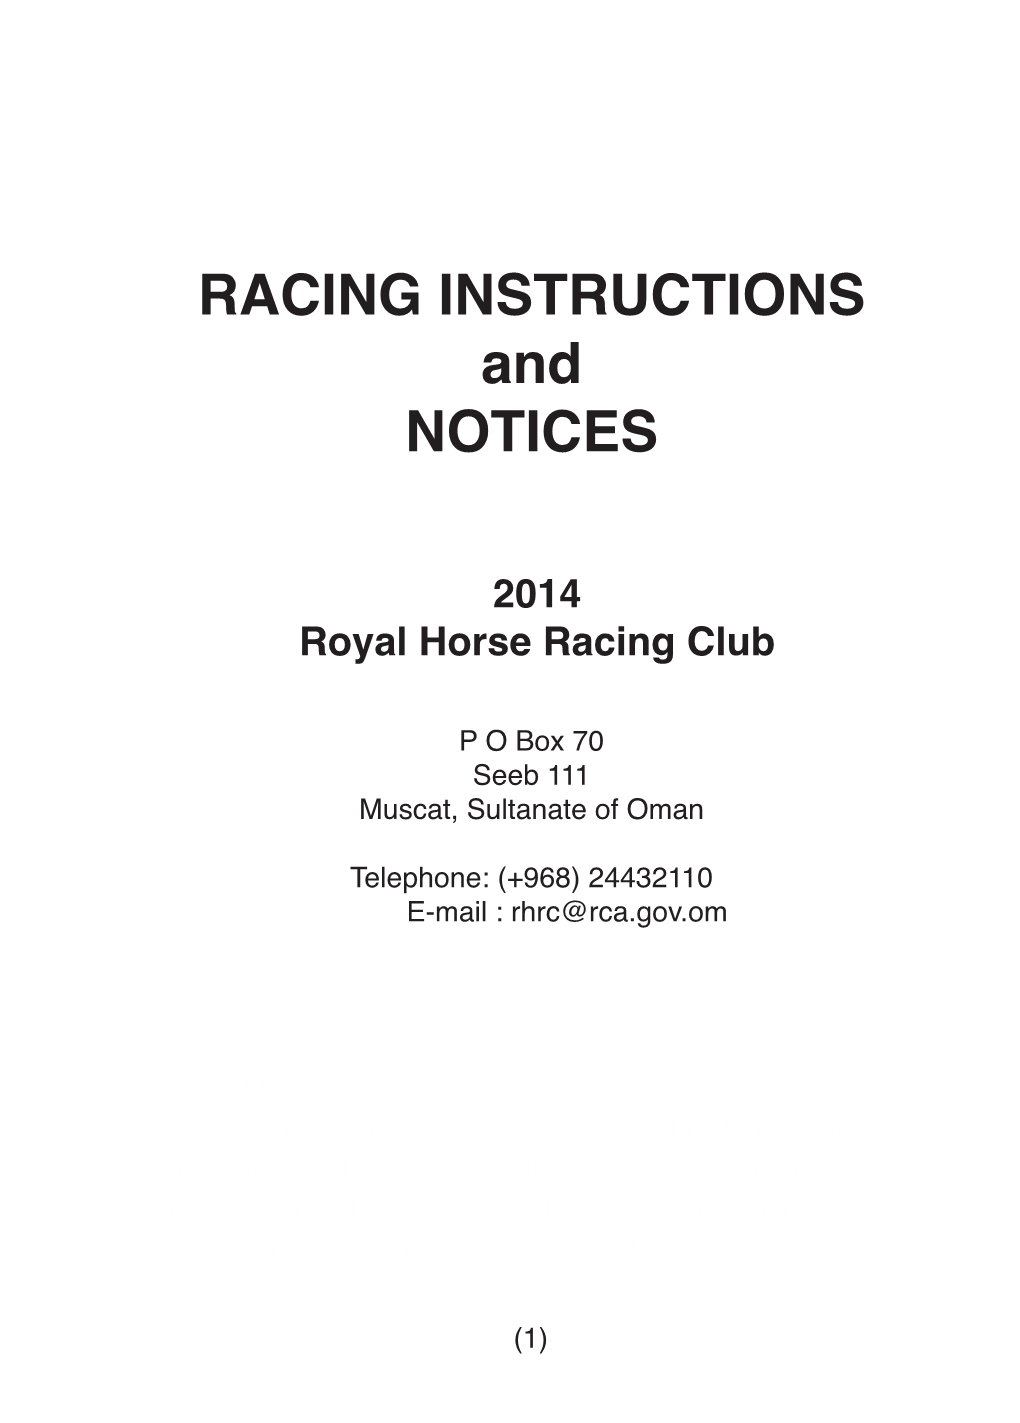 RACING INSTRUCTIONS and NOTICES